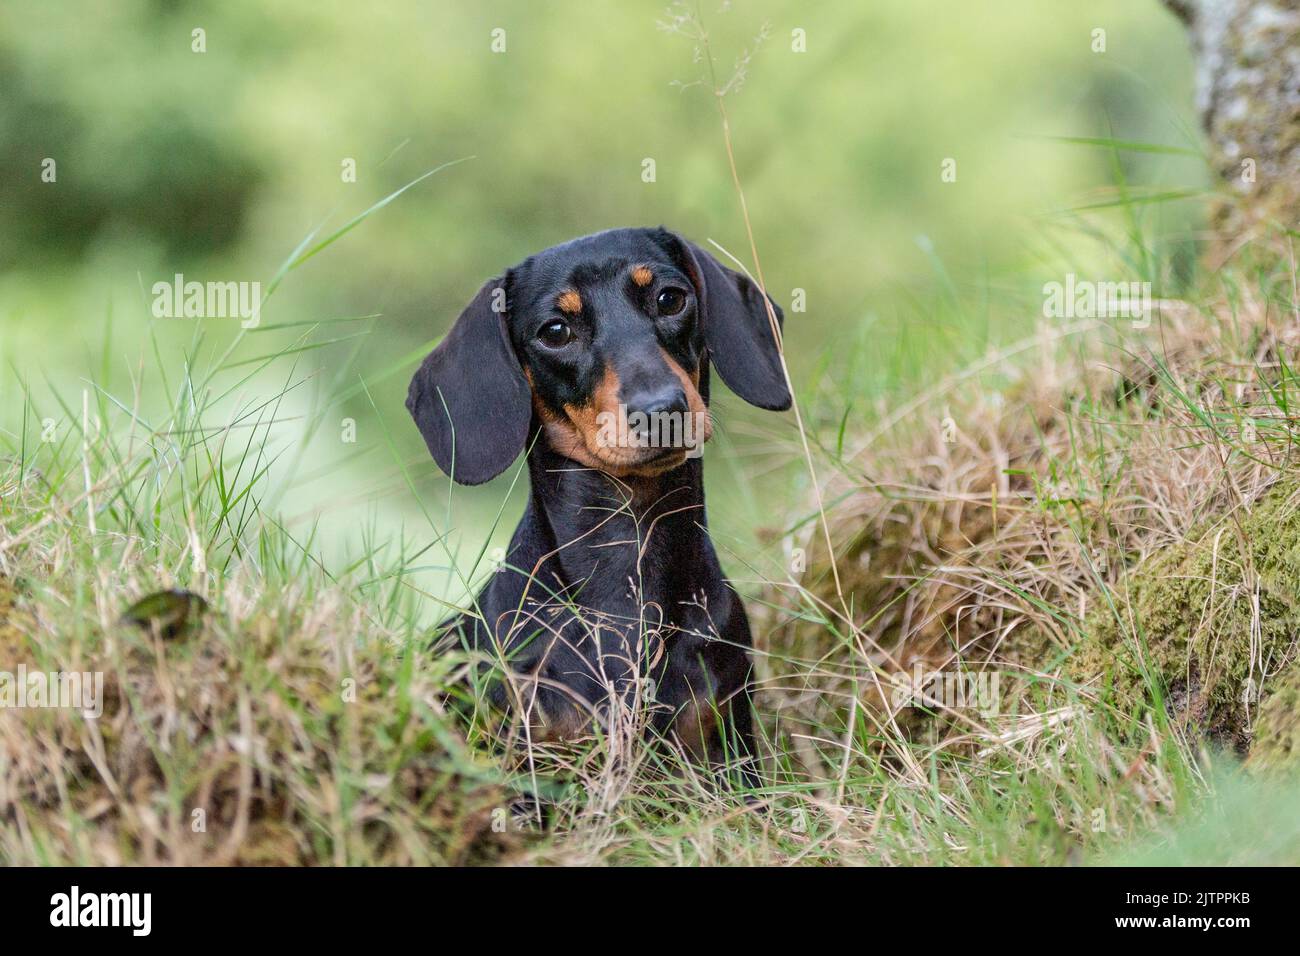 Miniature Smooth Haired Dachshund Stock Photo